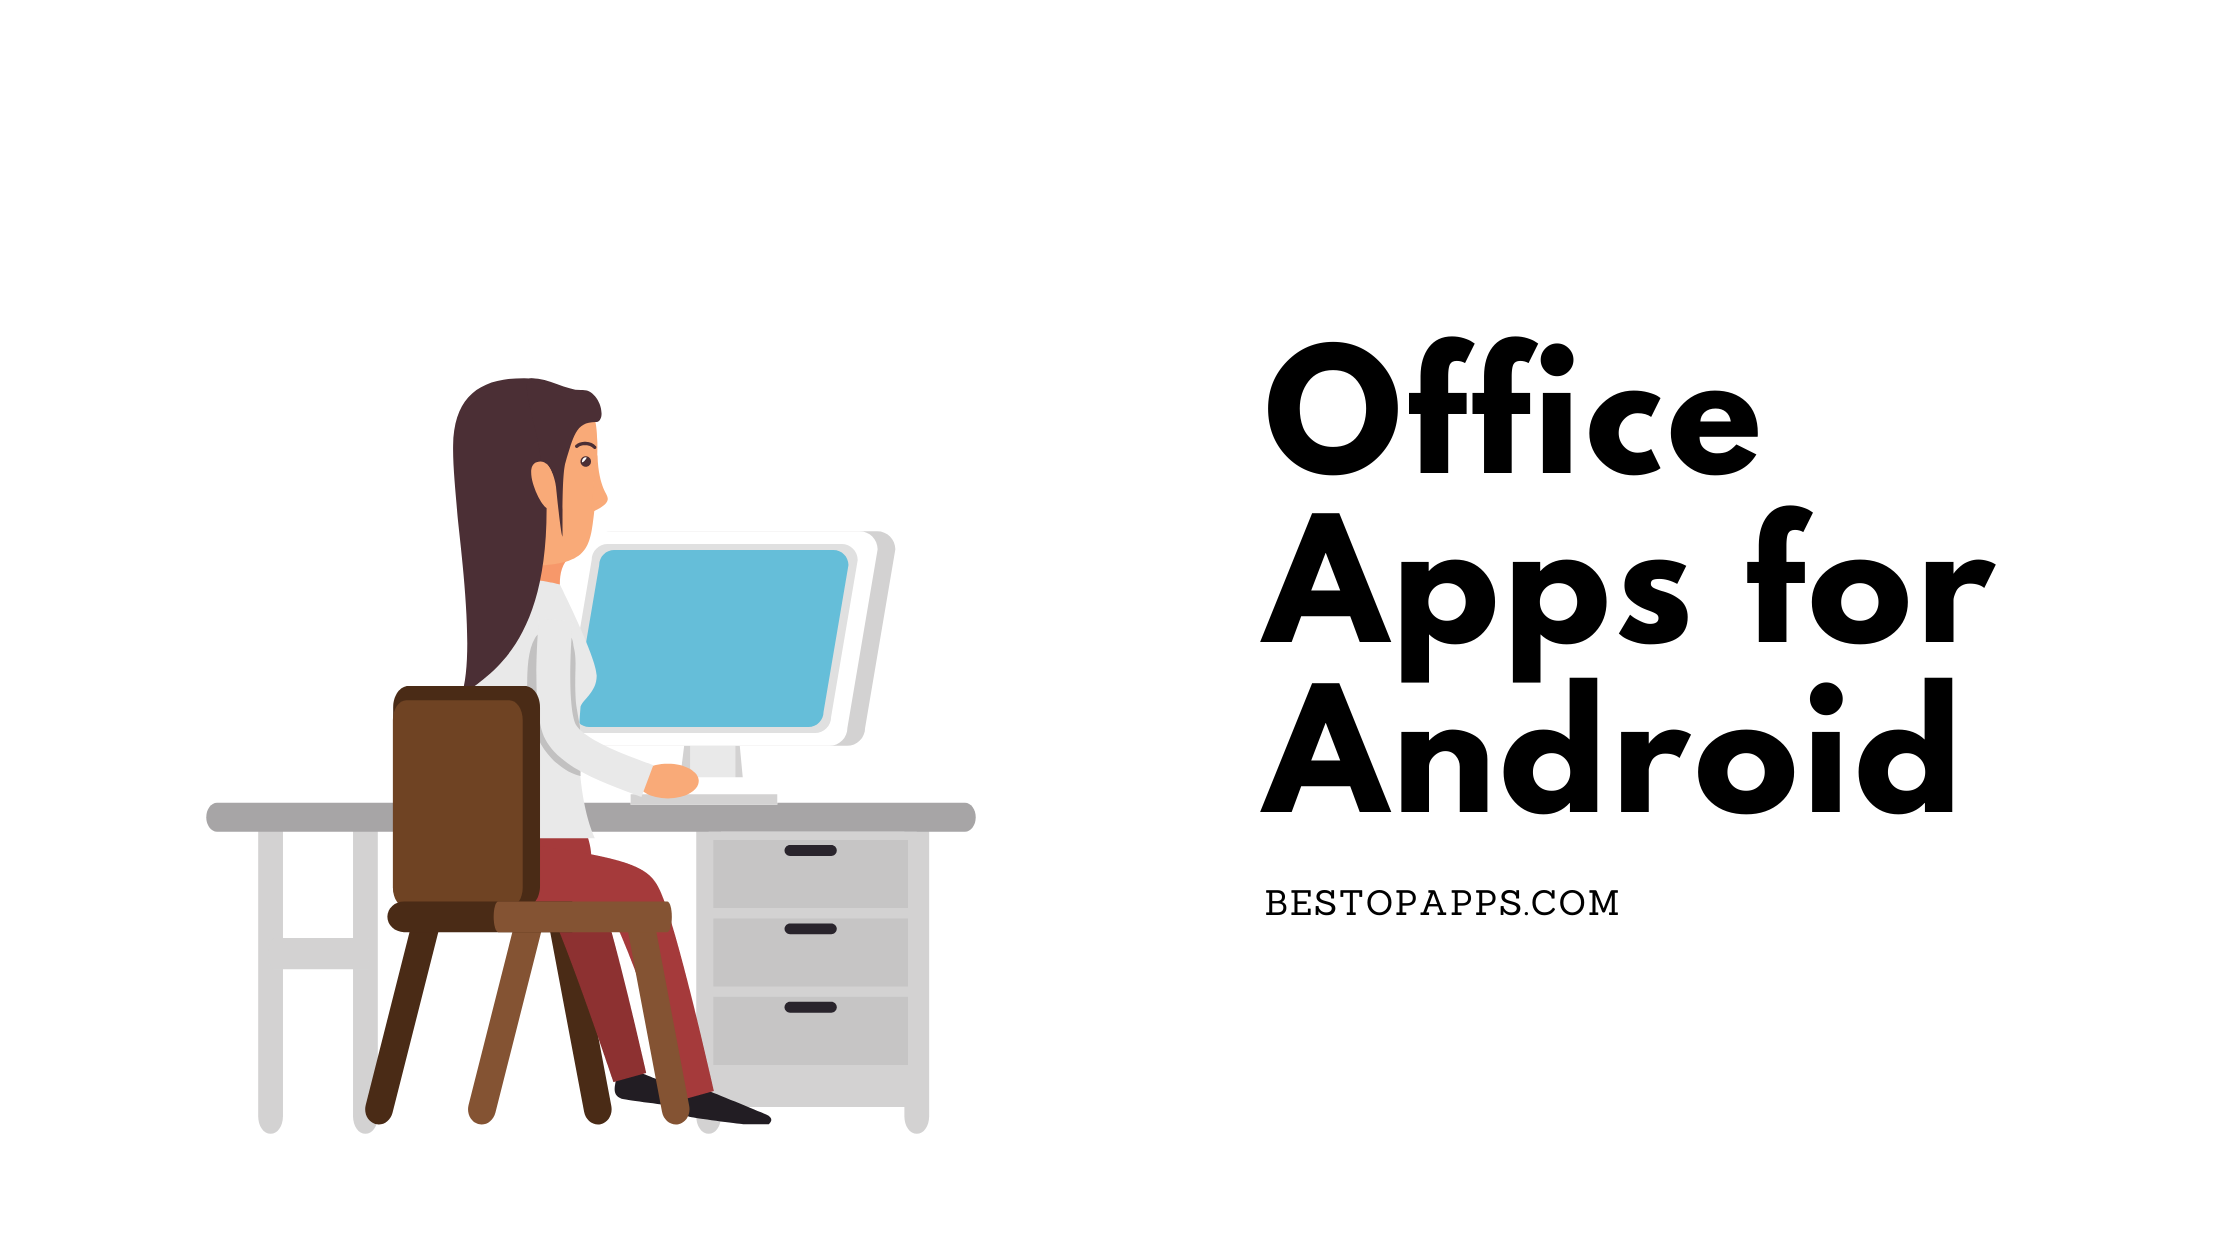 Office Apps for Android